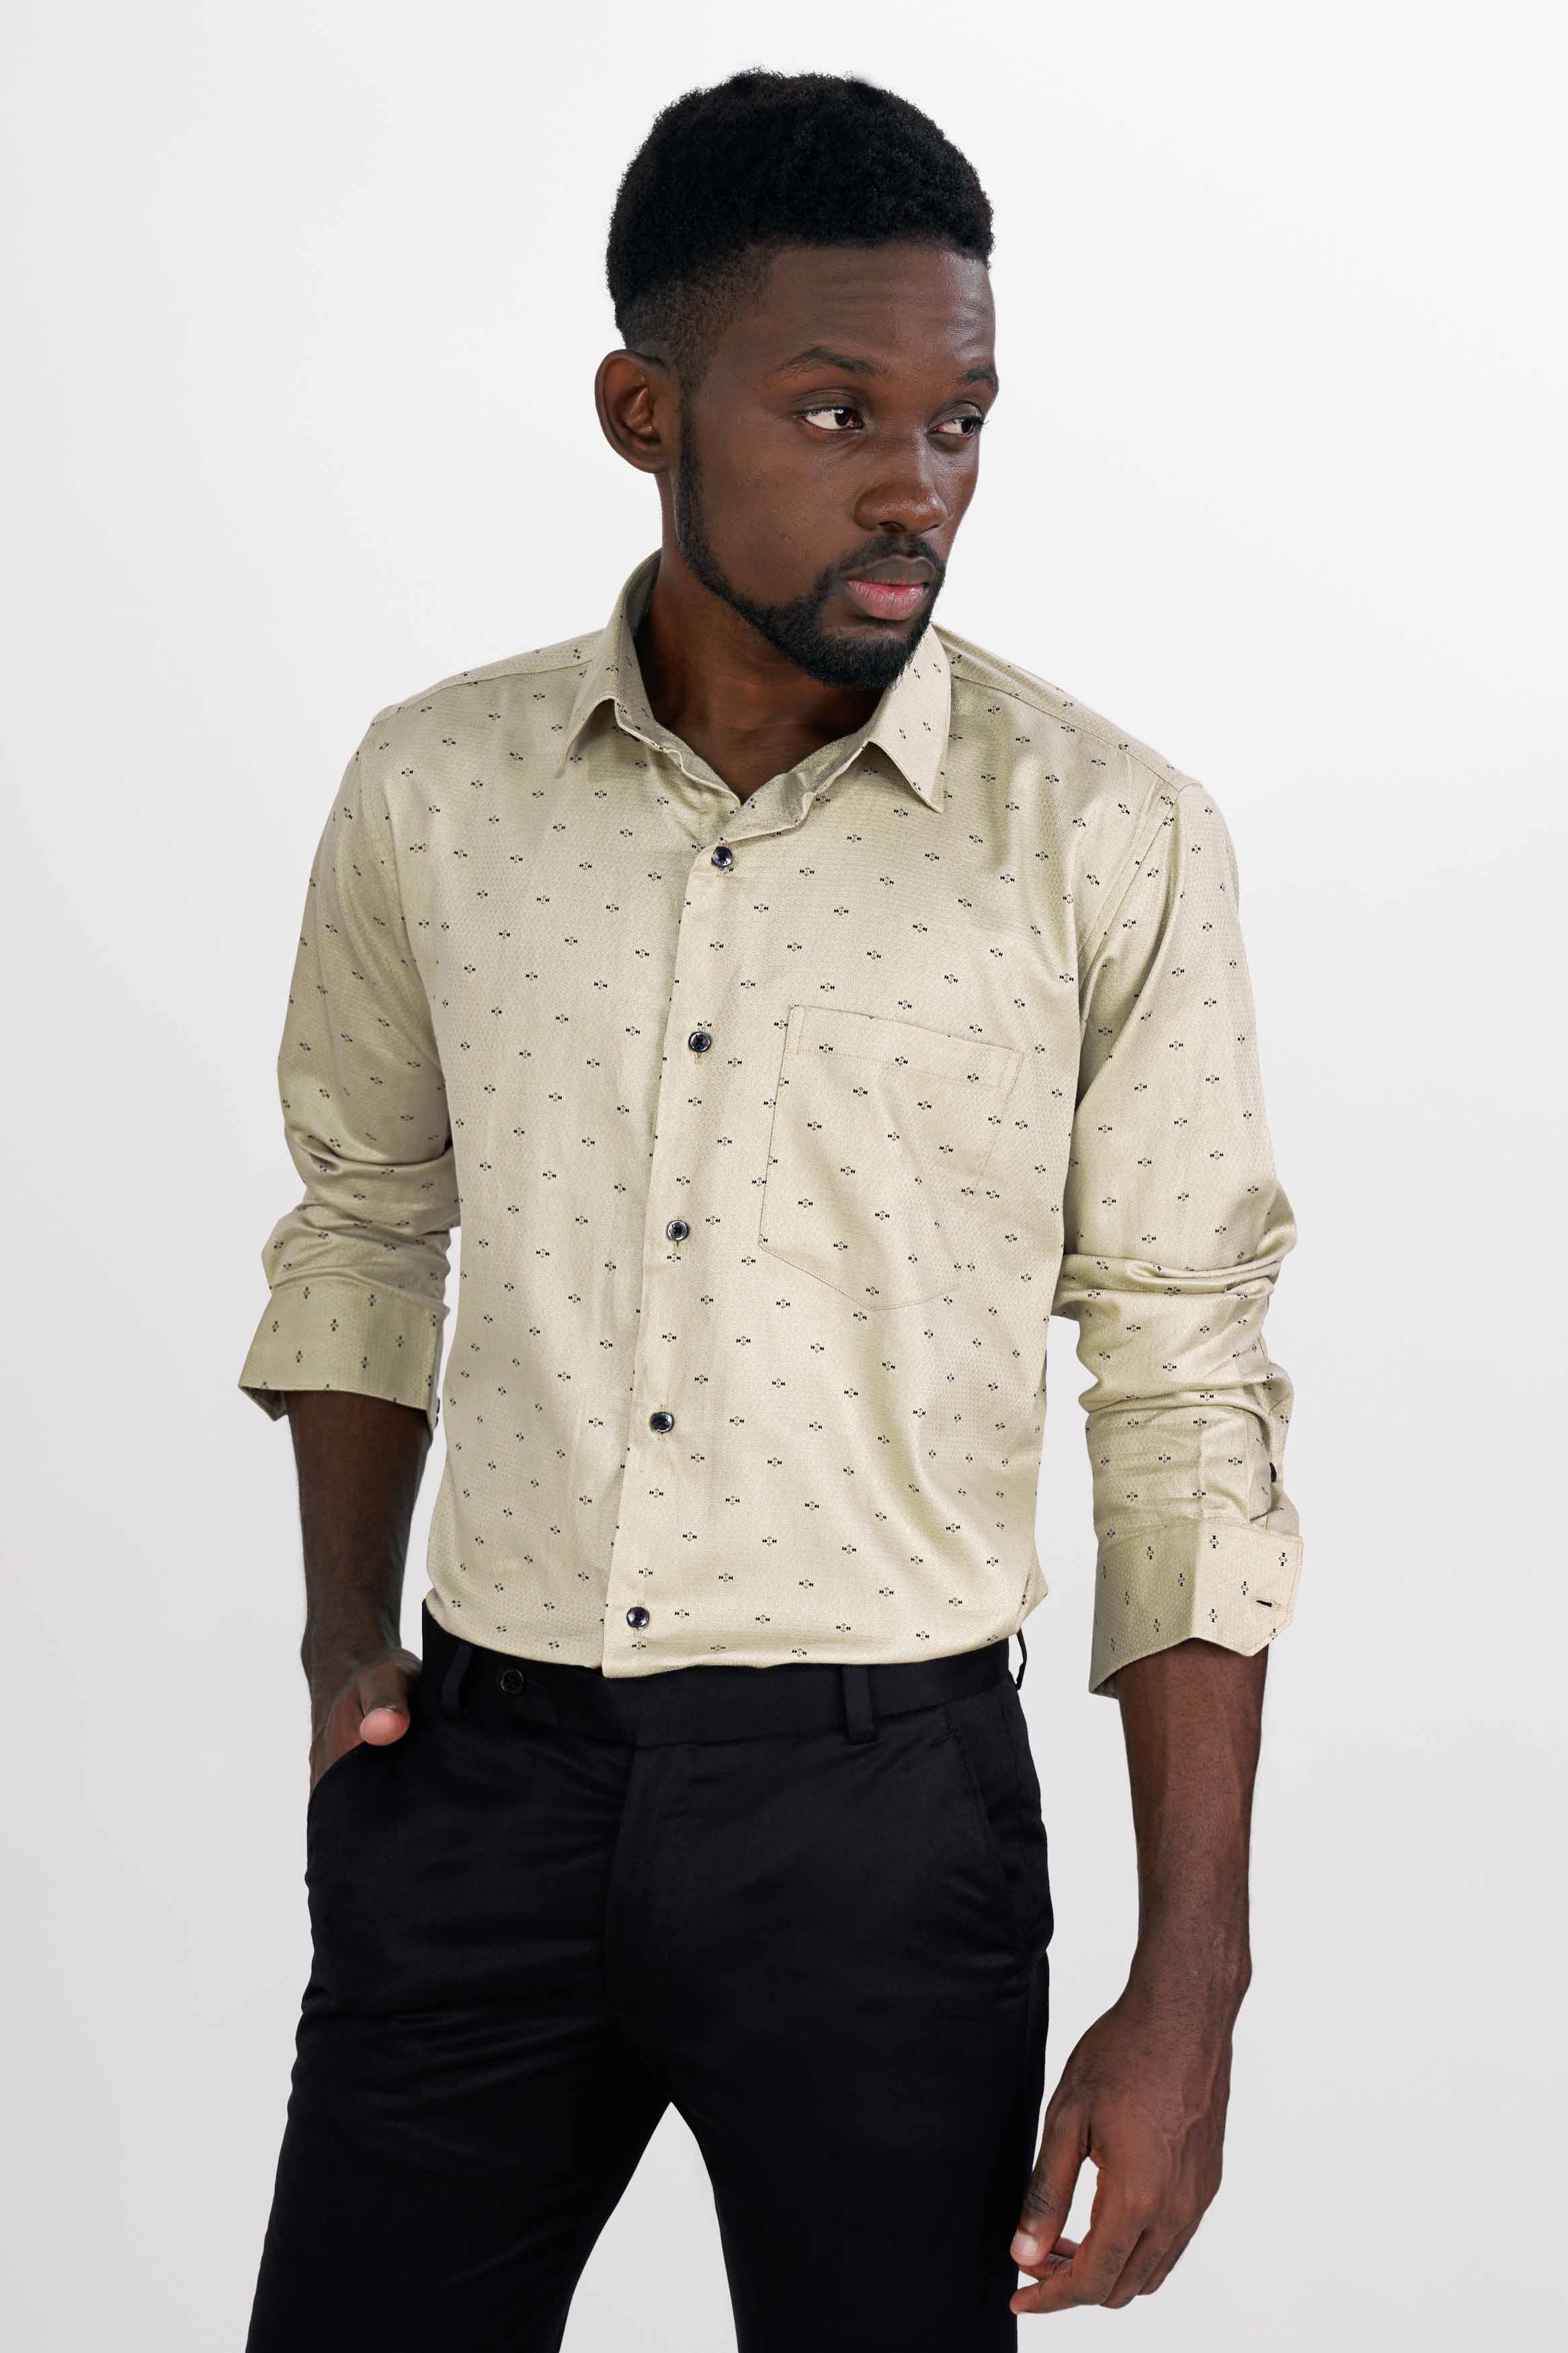 French Crown Coral Reef Brown Formal/Casual Textured Premium Cotton Shirt For Men, 42 / L / Half / Short Sleeves